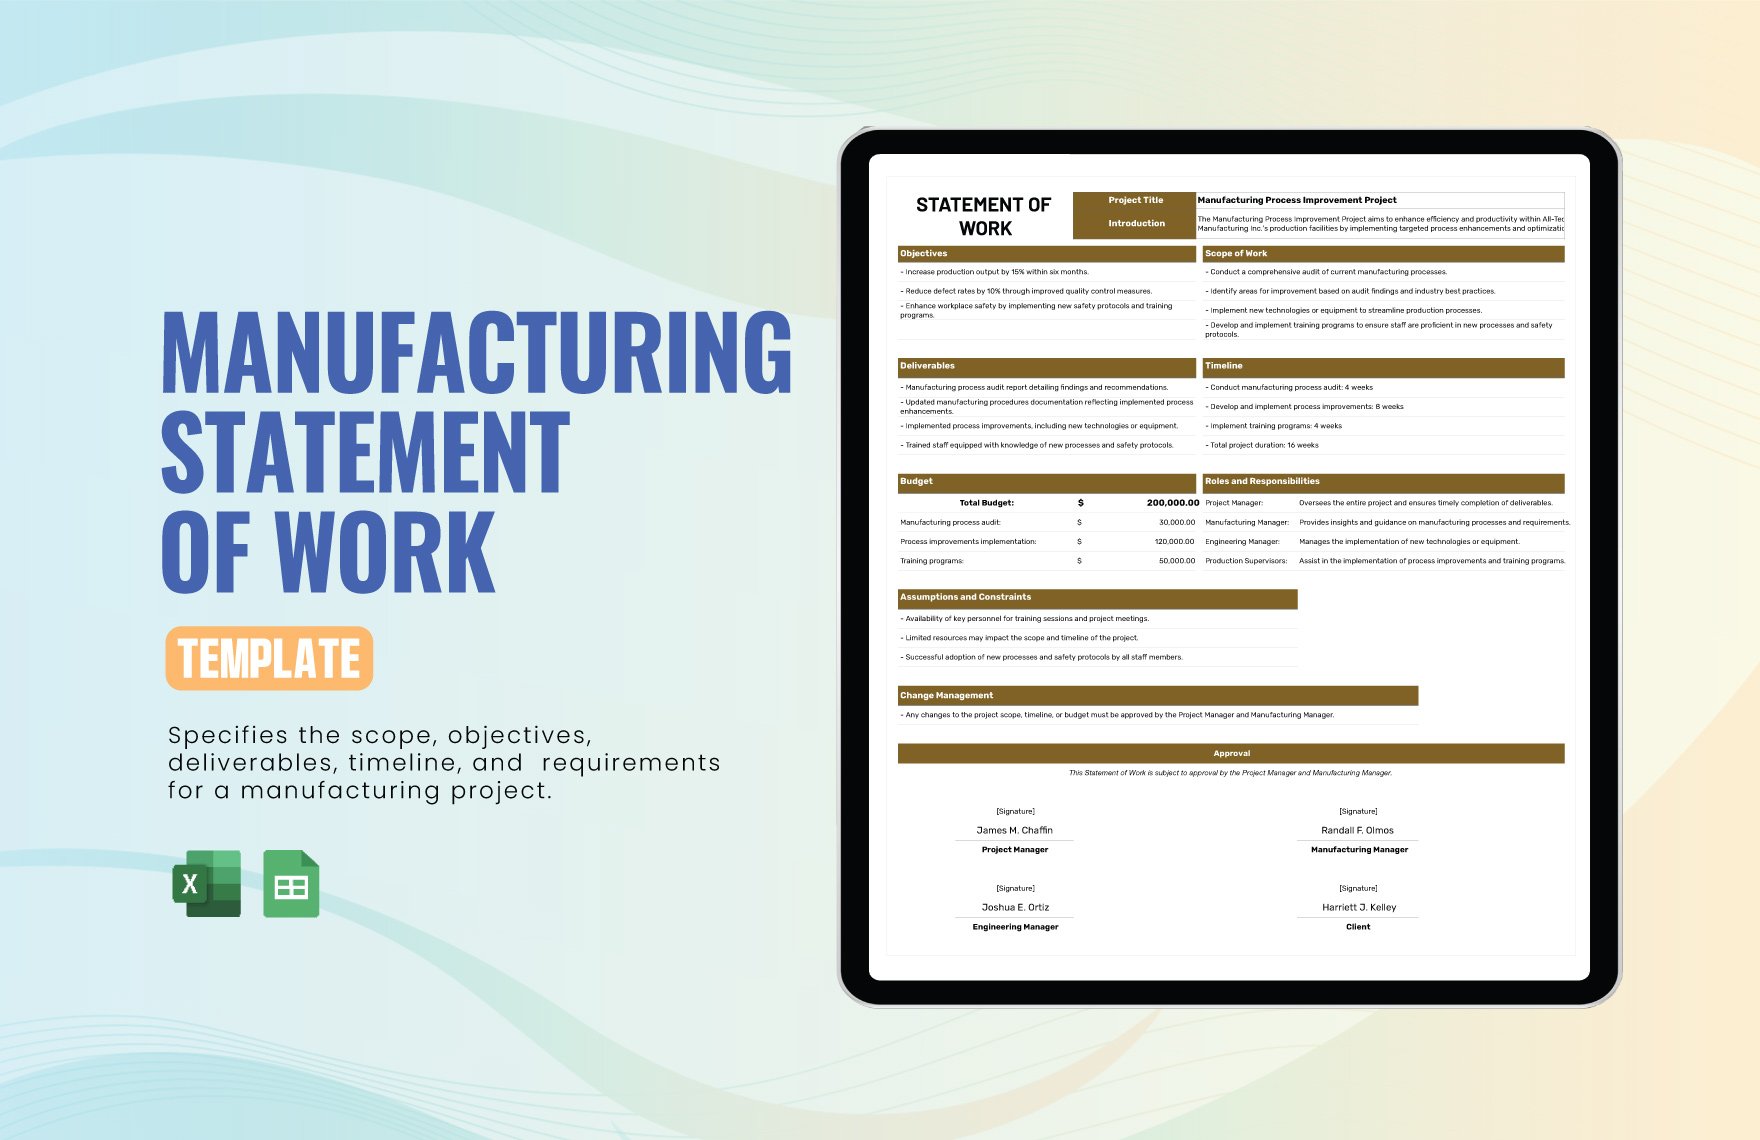 Manufacturing Statement of Work Template